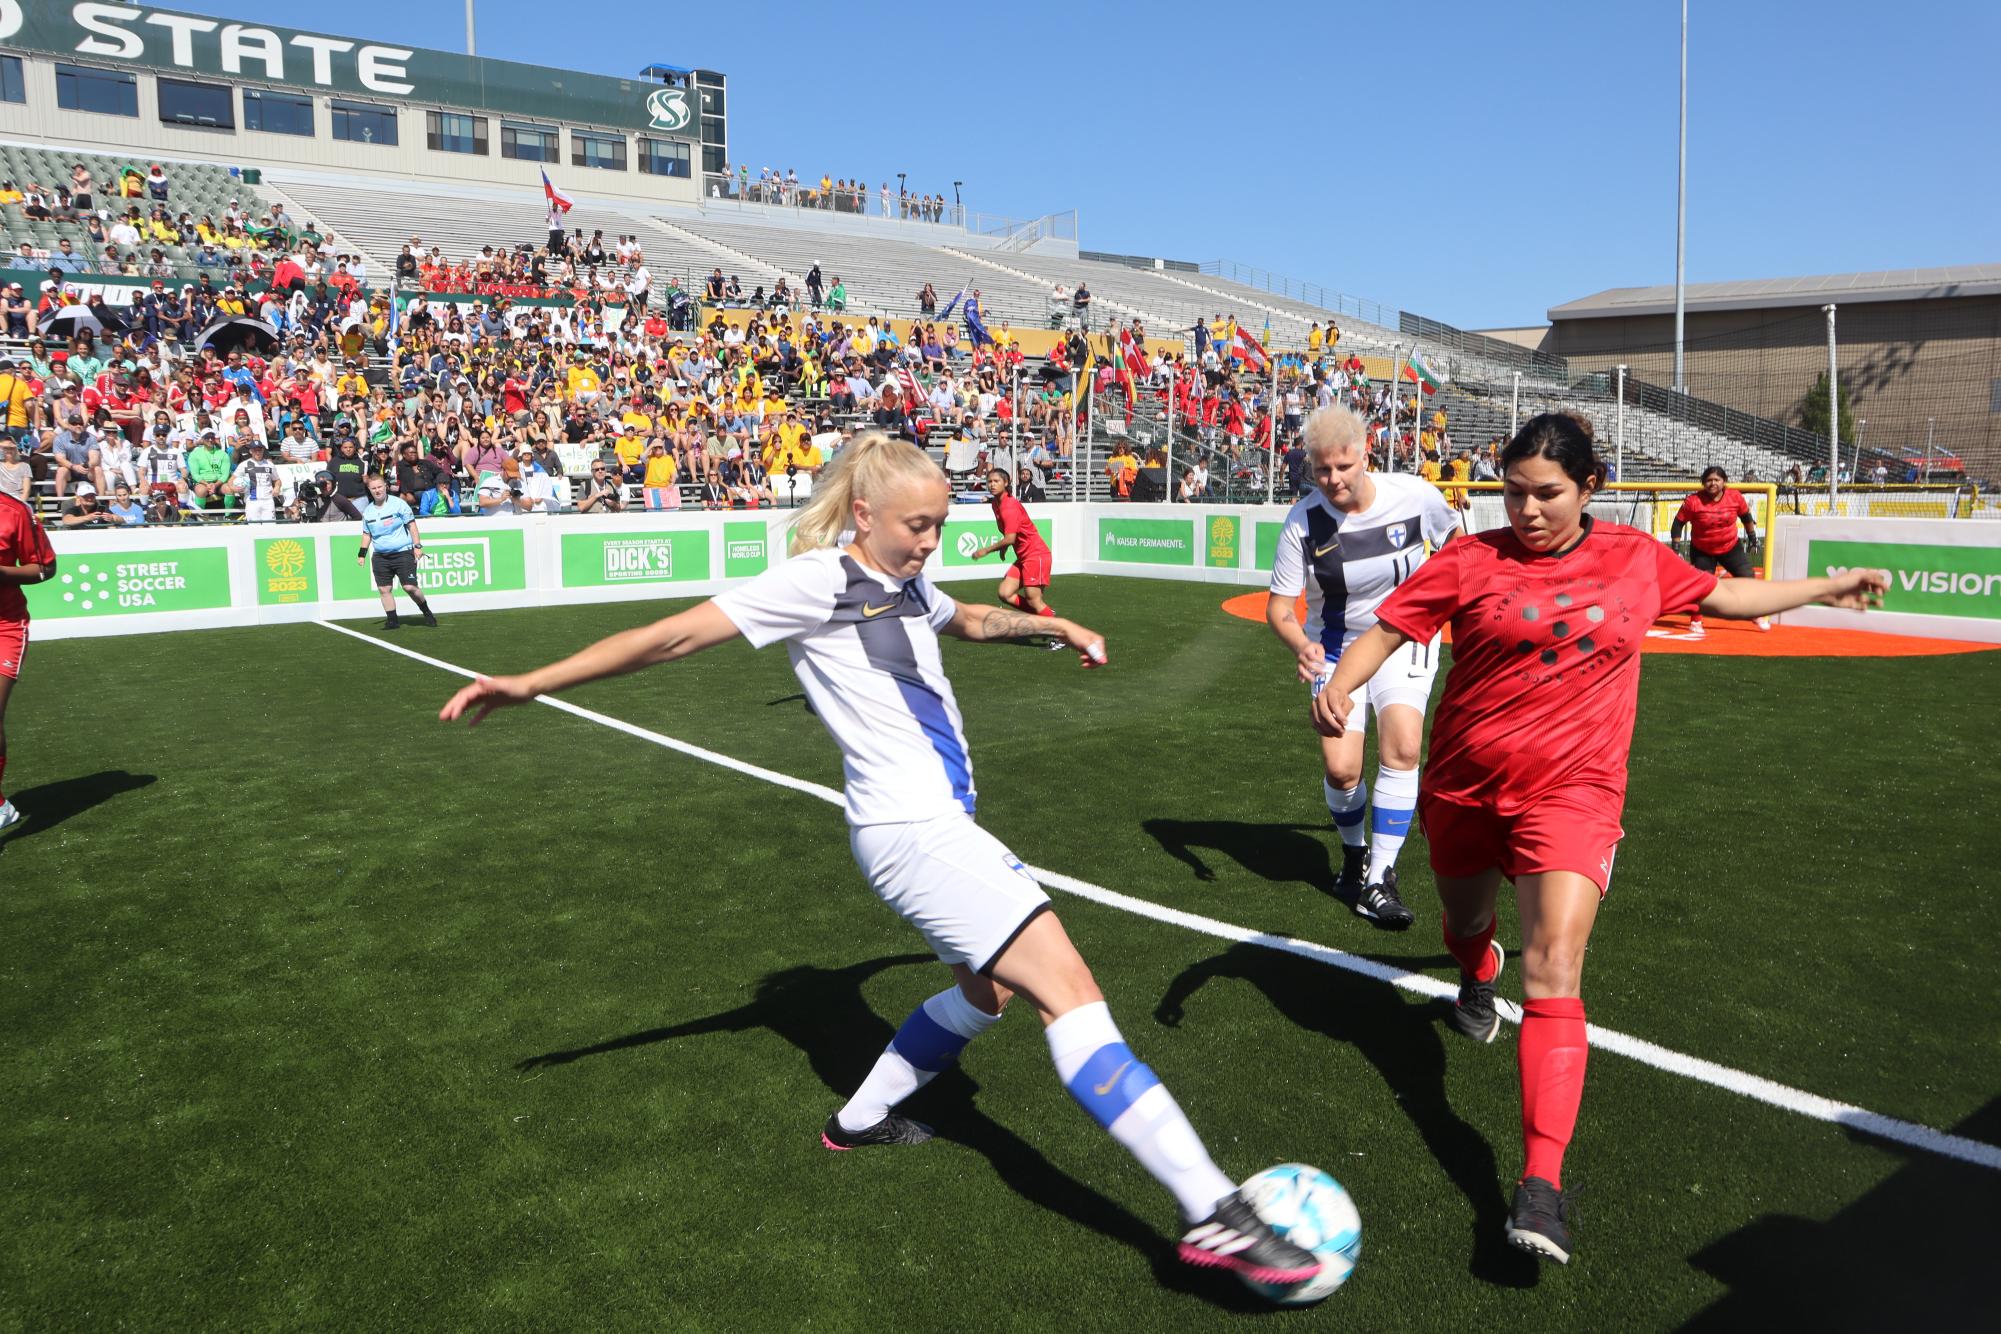 A USA women’s soccer player attempts to block Finland at the Homeless World Cup’s introductory street soccer match at Sacramento State’s Hornet Stadium July 8. Street Soccer USA brought the HWC to Sacramento from July 8 to July 15.